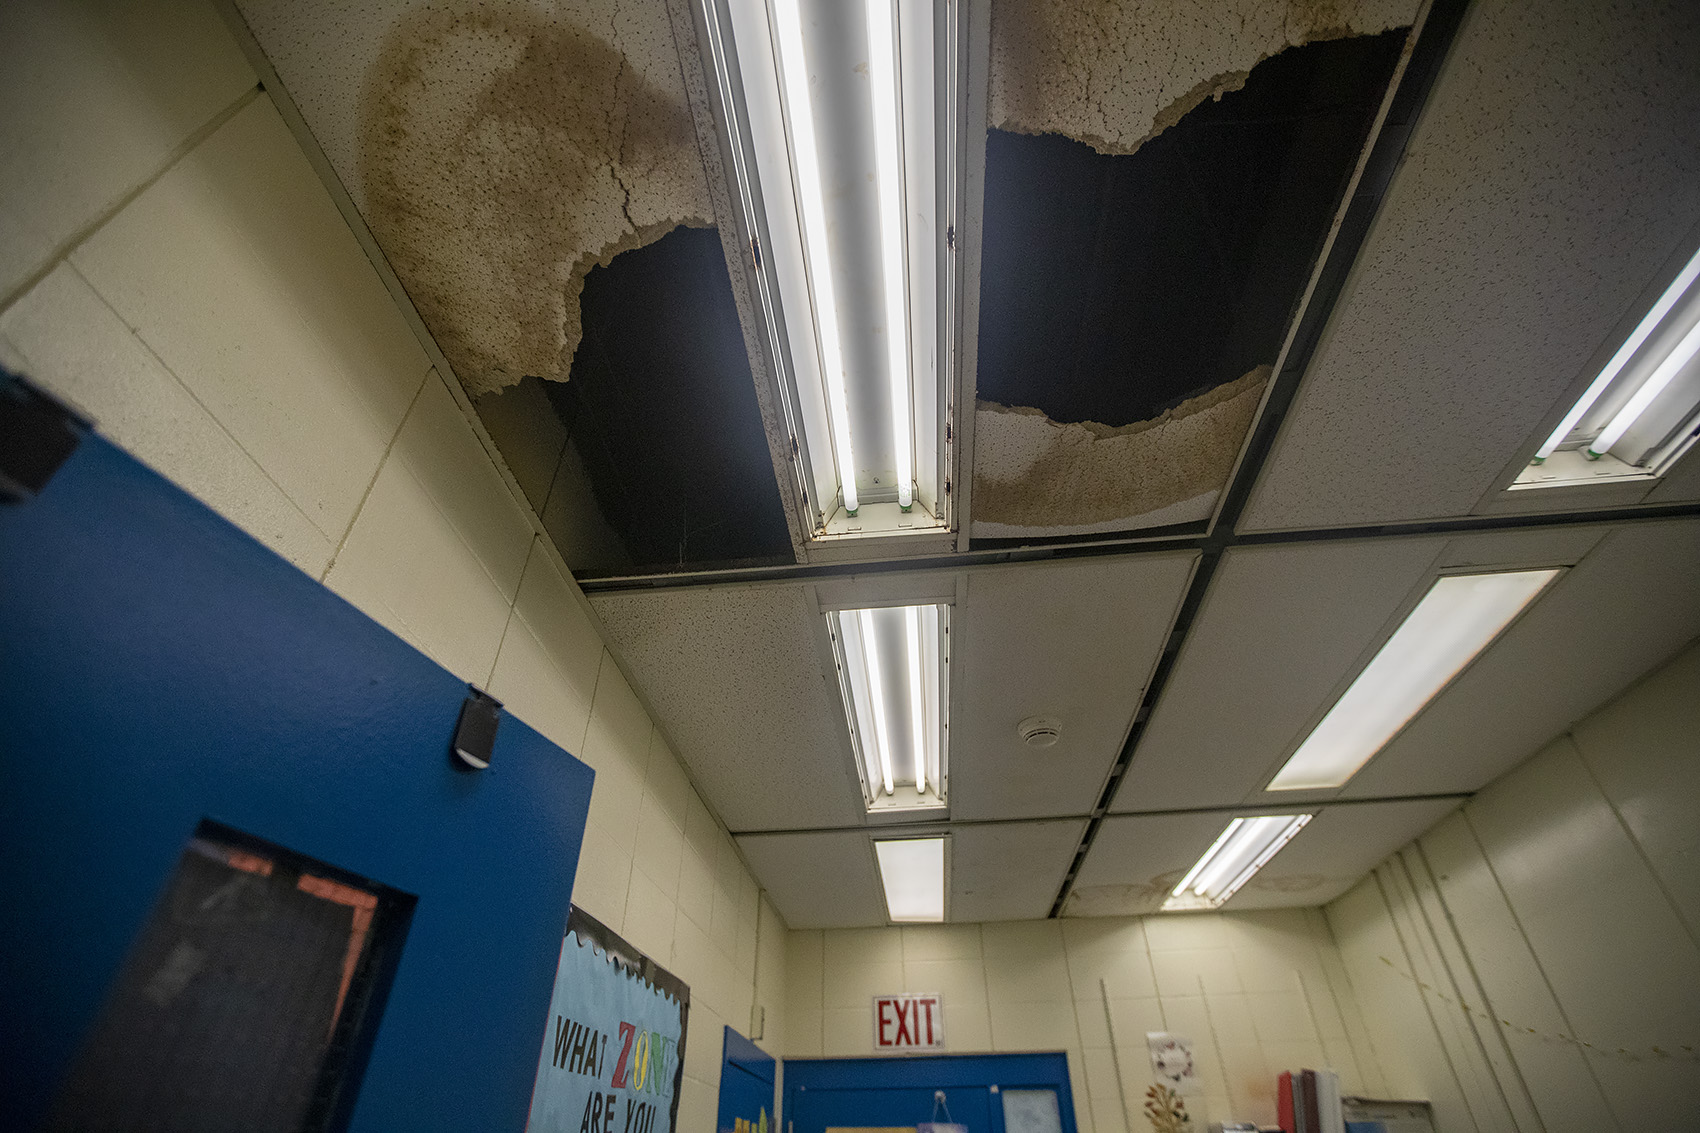 Falling Ceiling Tiles And Rusty Windows Inside A Boston